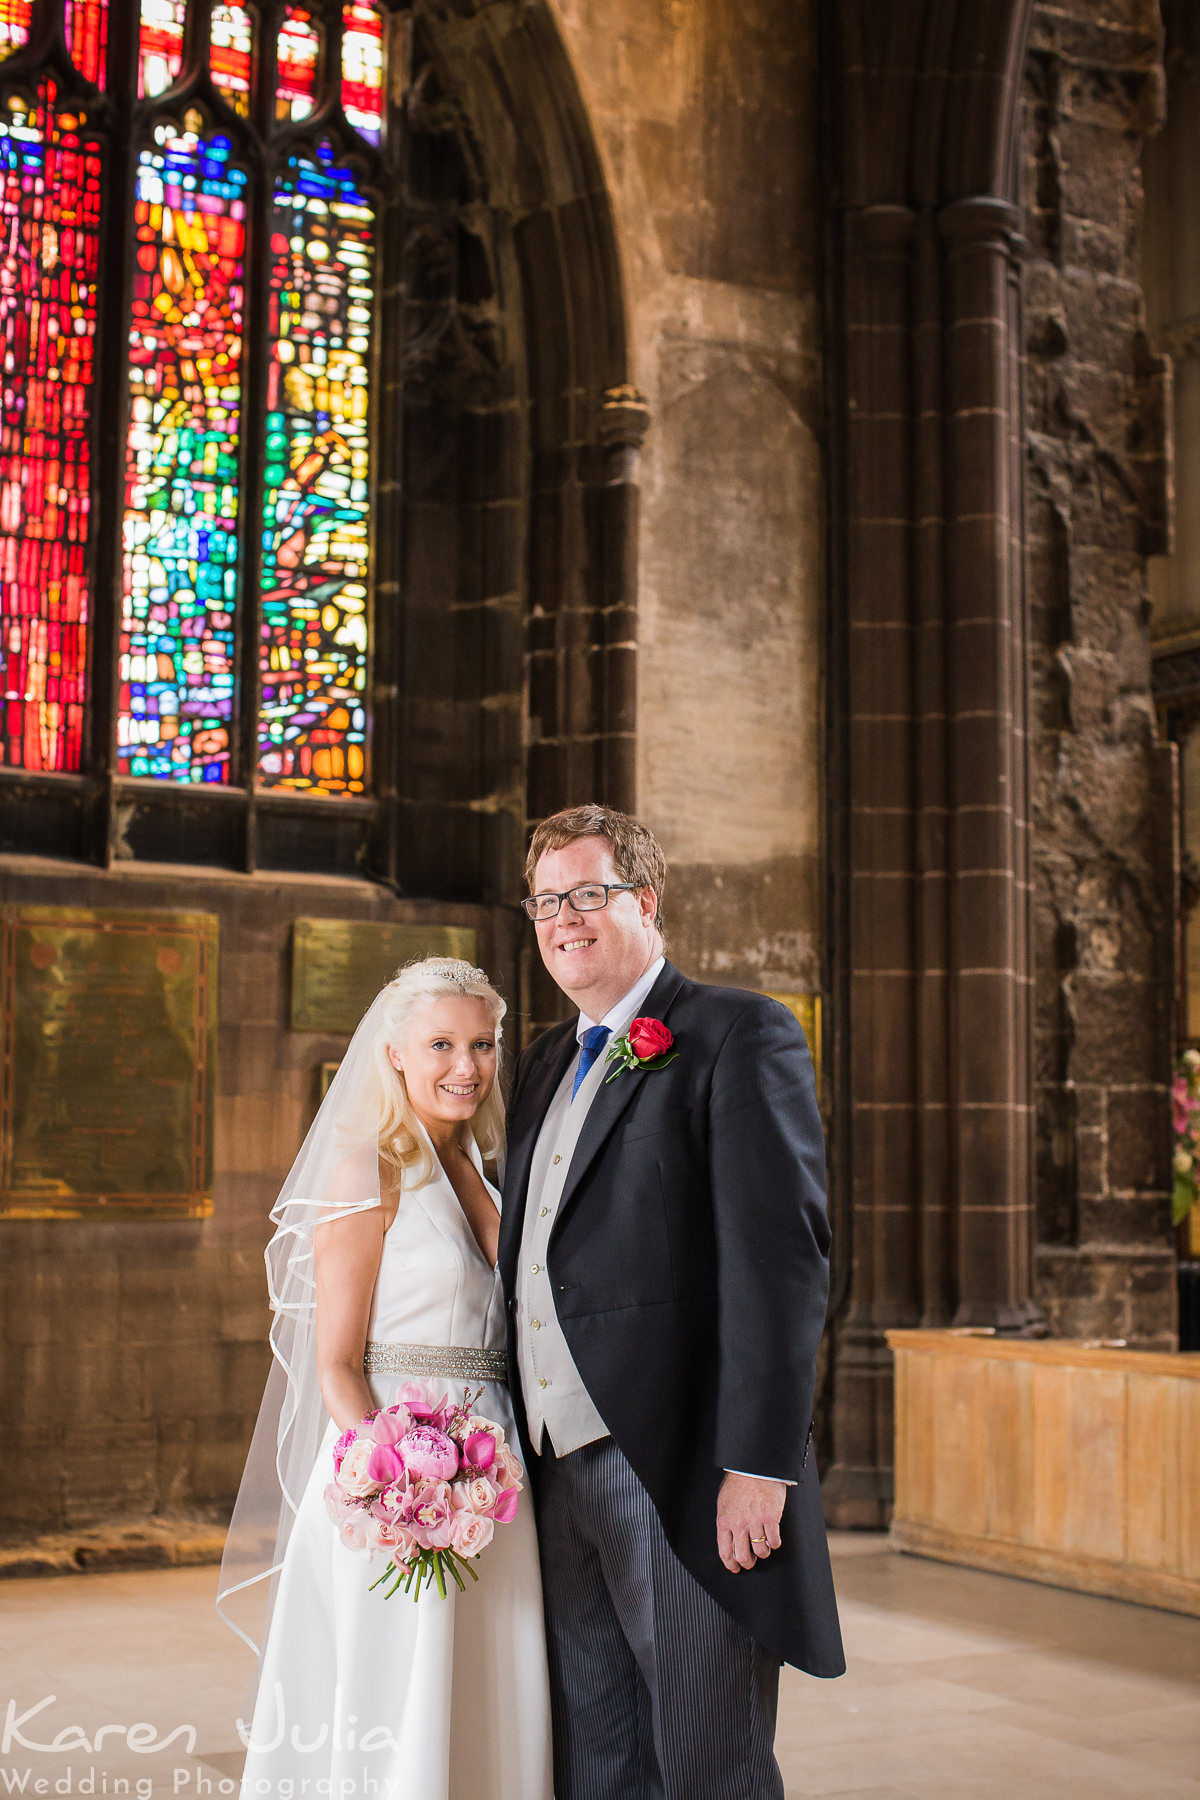 bride and groom wedding day portrait in Manchester Cathedral